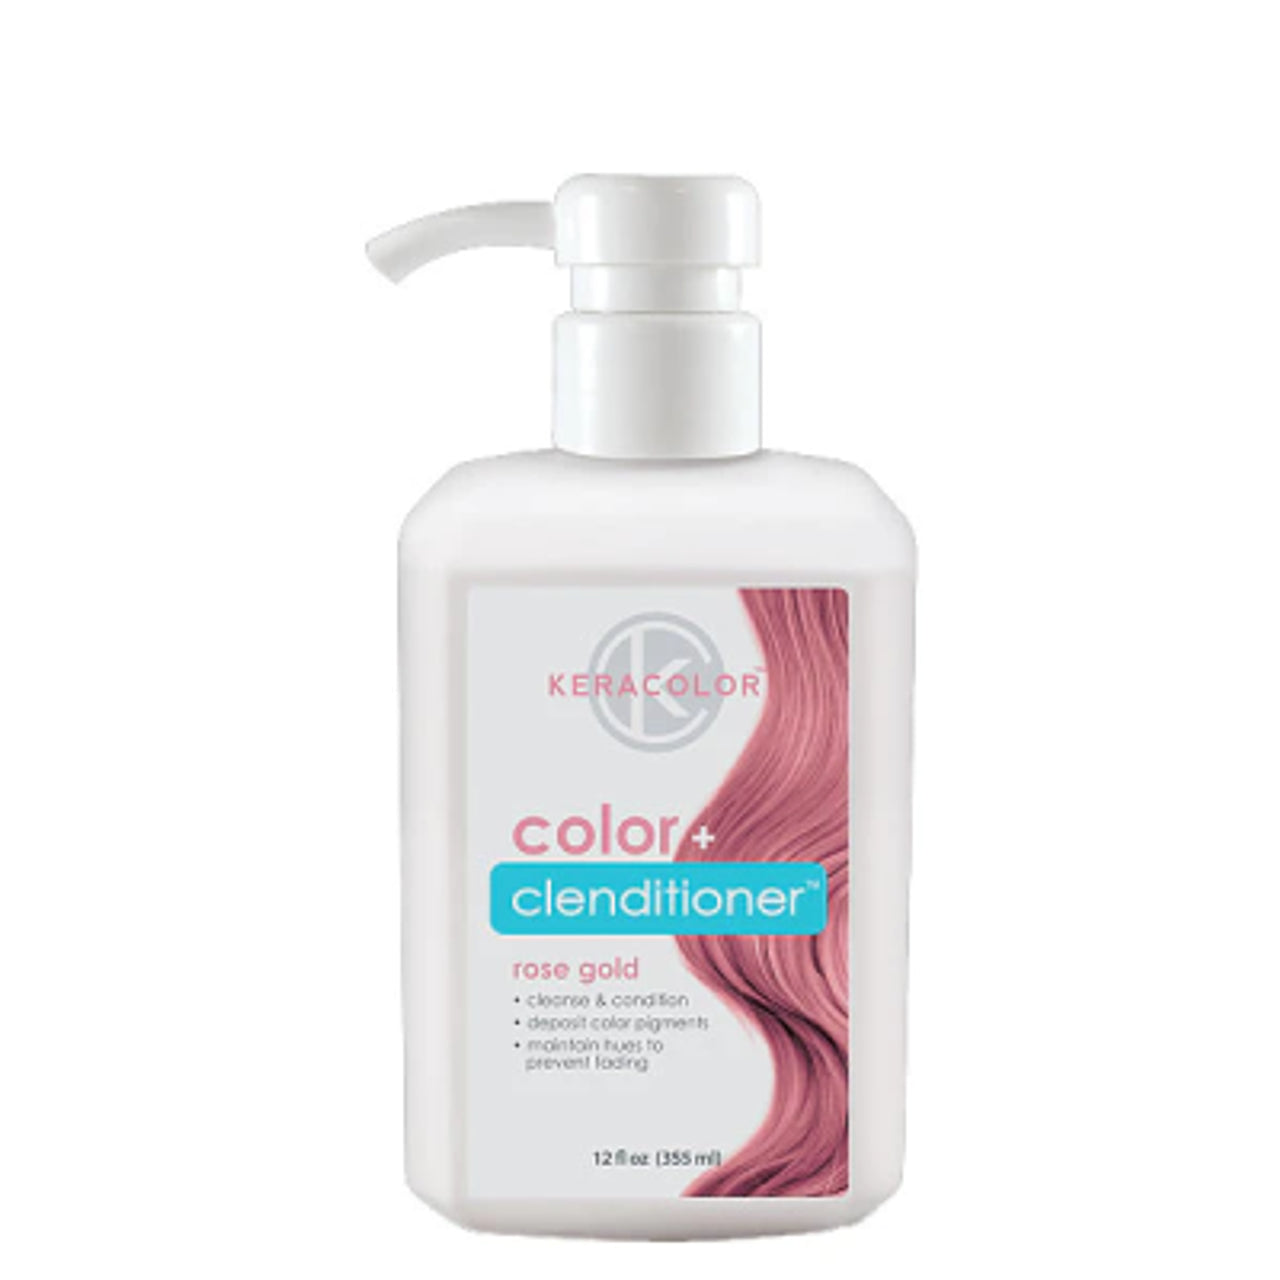 Keracolor Color + Clenditioner 355ml - ROSE GOLD - Kess Hair and Beauty